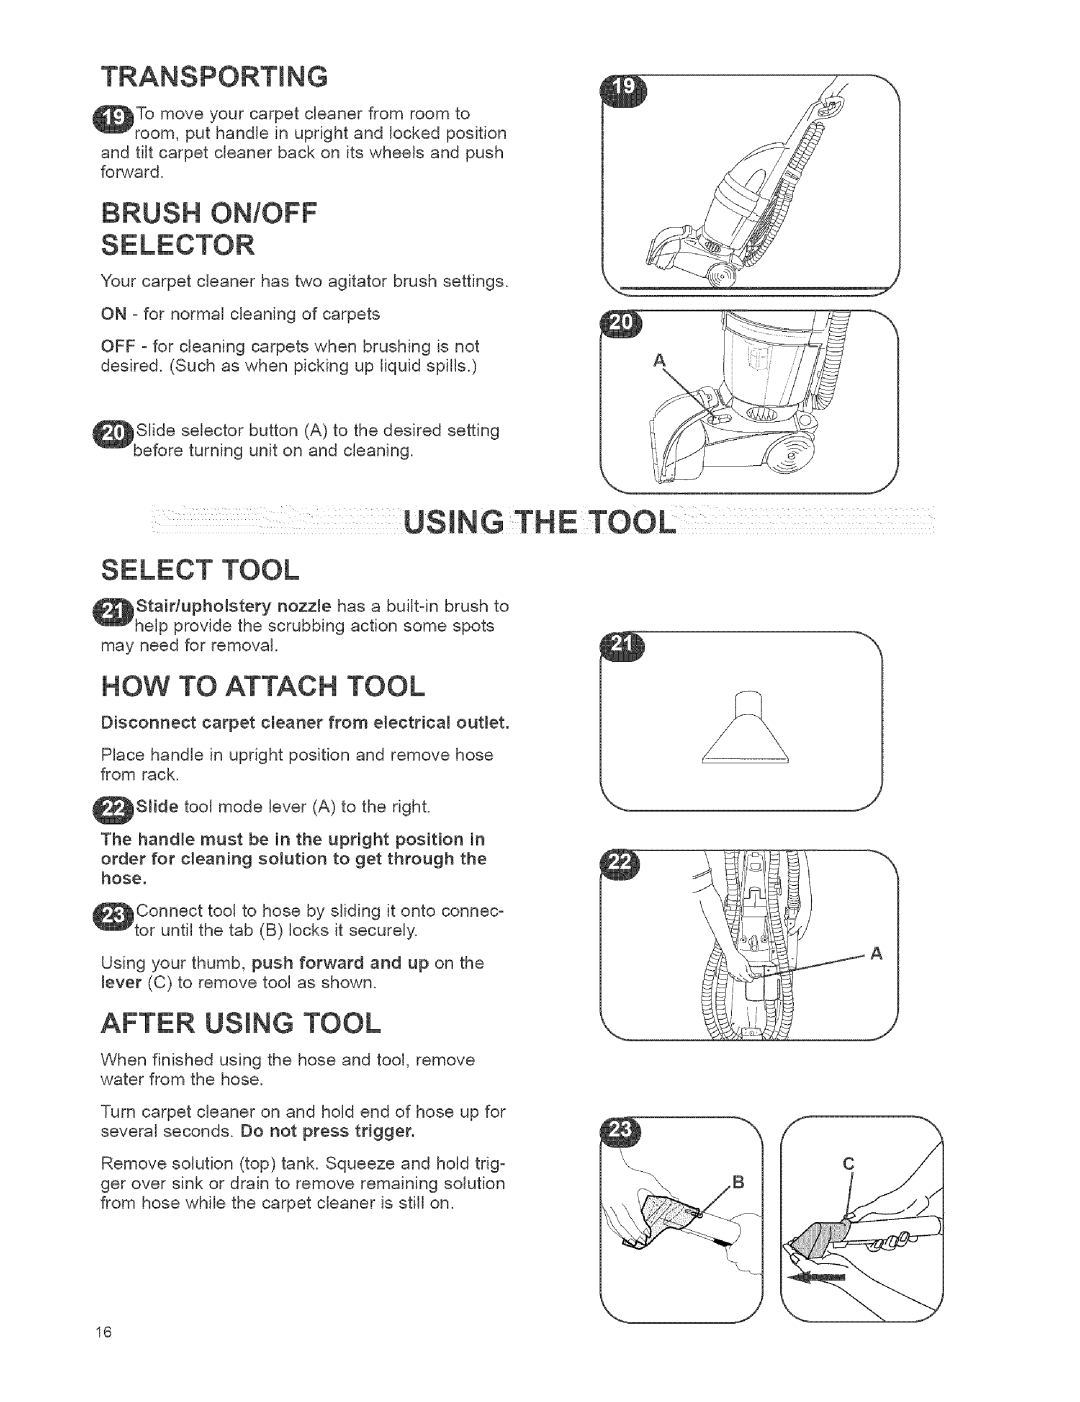 Kenmore 111.784, 473.8592 owner manual Brush On/Off, How To Attach Tool, After Using Tool, Select, lever C to 